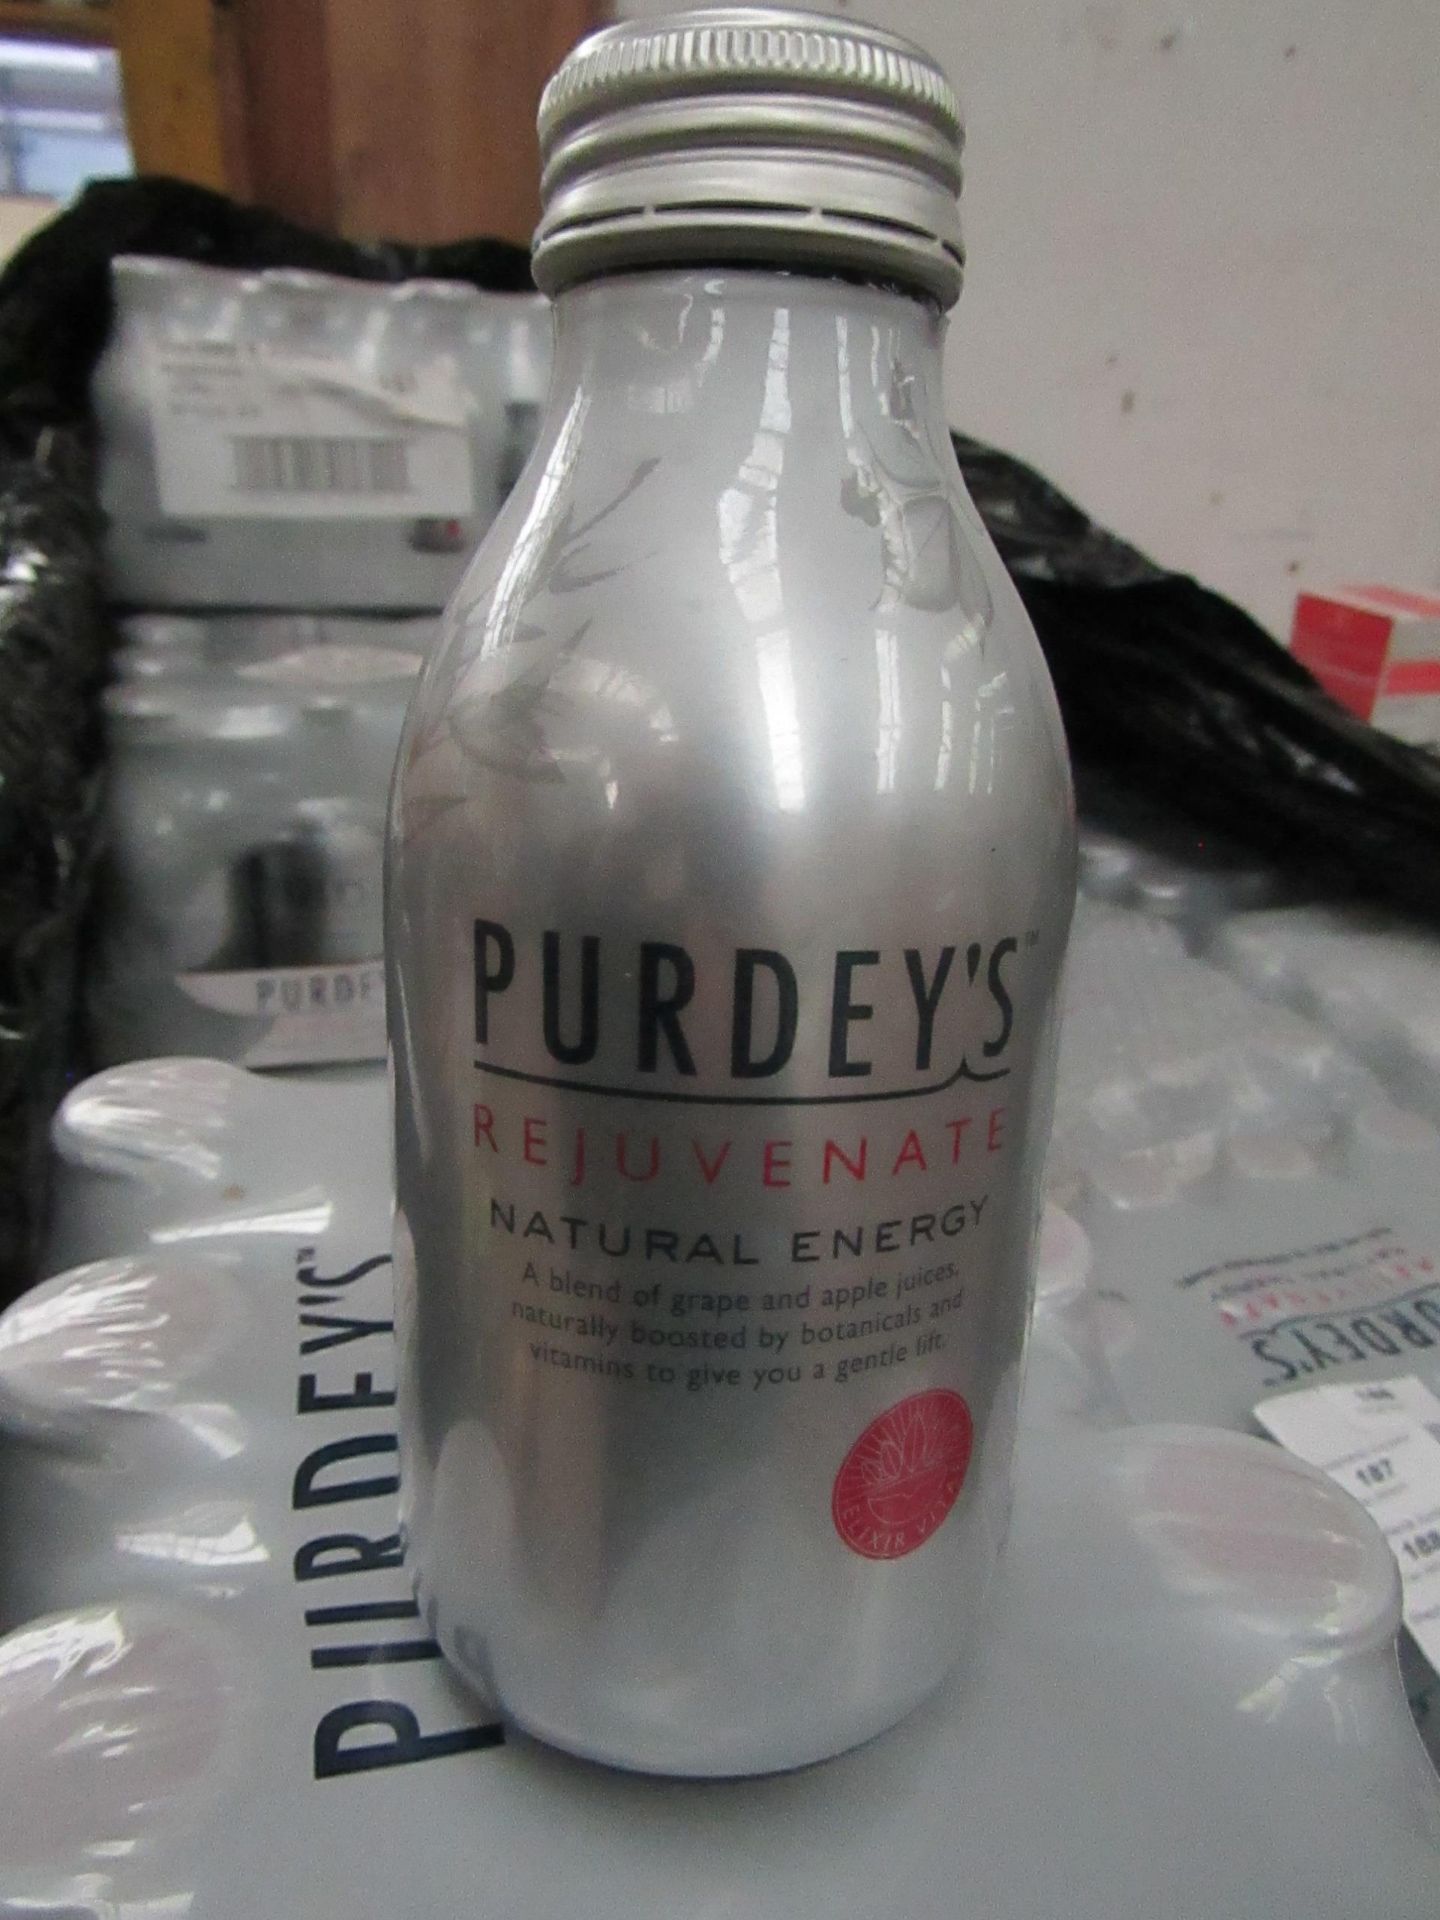 3x Packs of 12 Being : Purdey's - Rejuvenate Natural Energy (Grape & Apple Flavoured Juice) - BBD